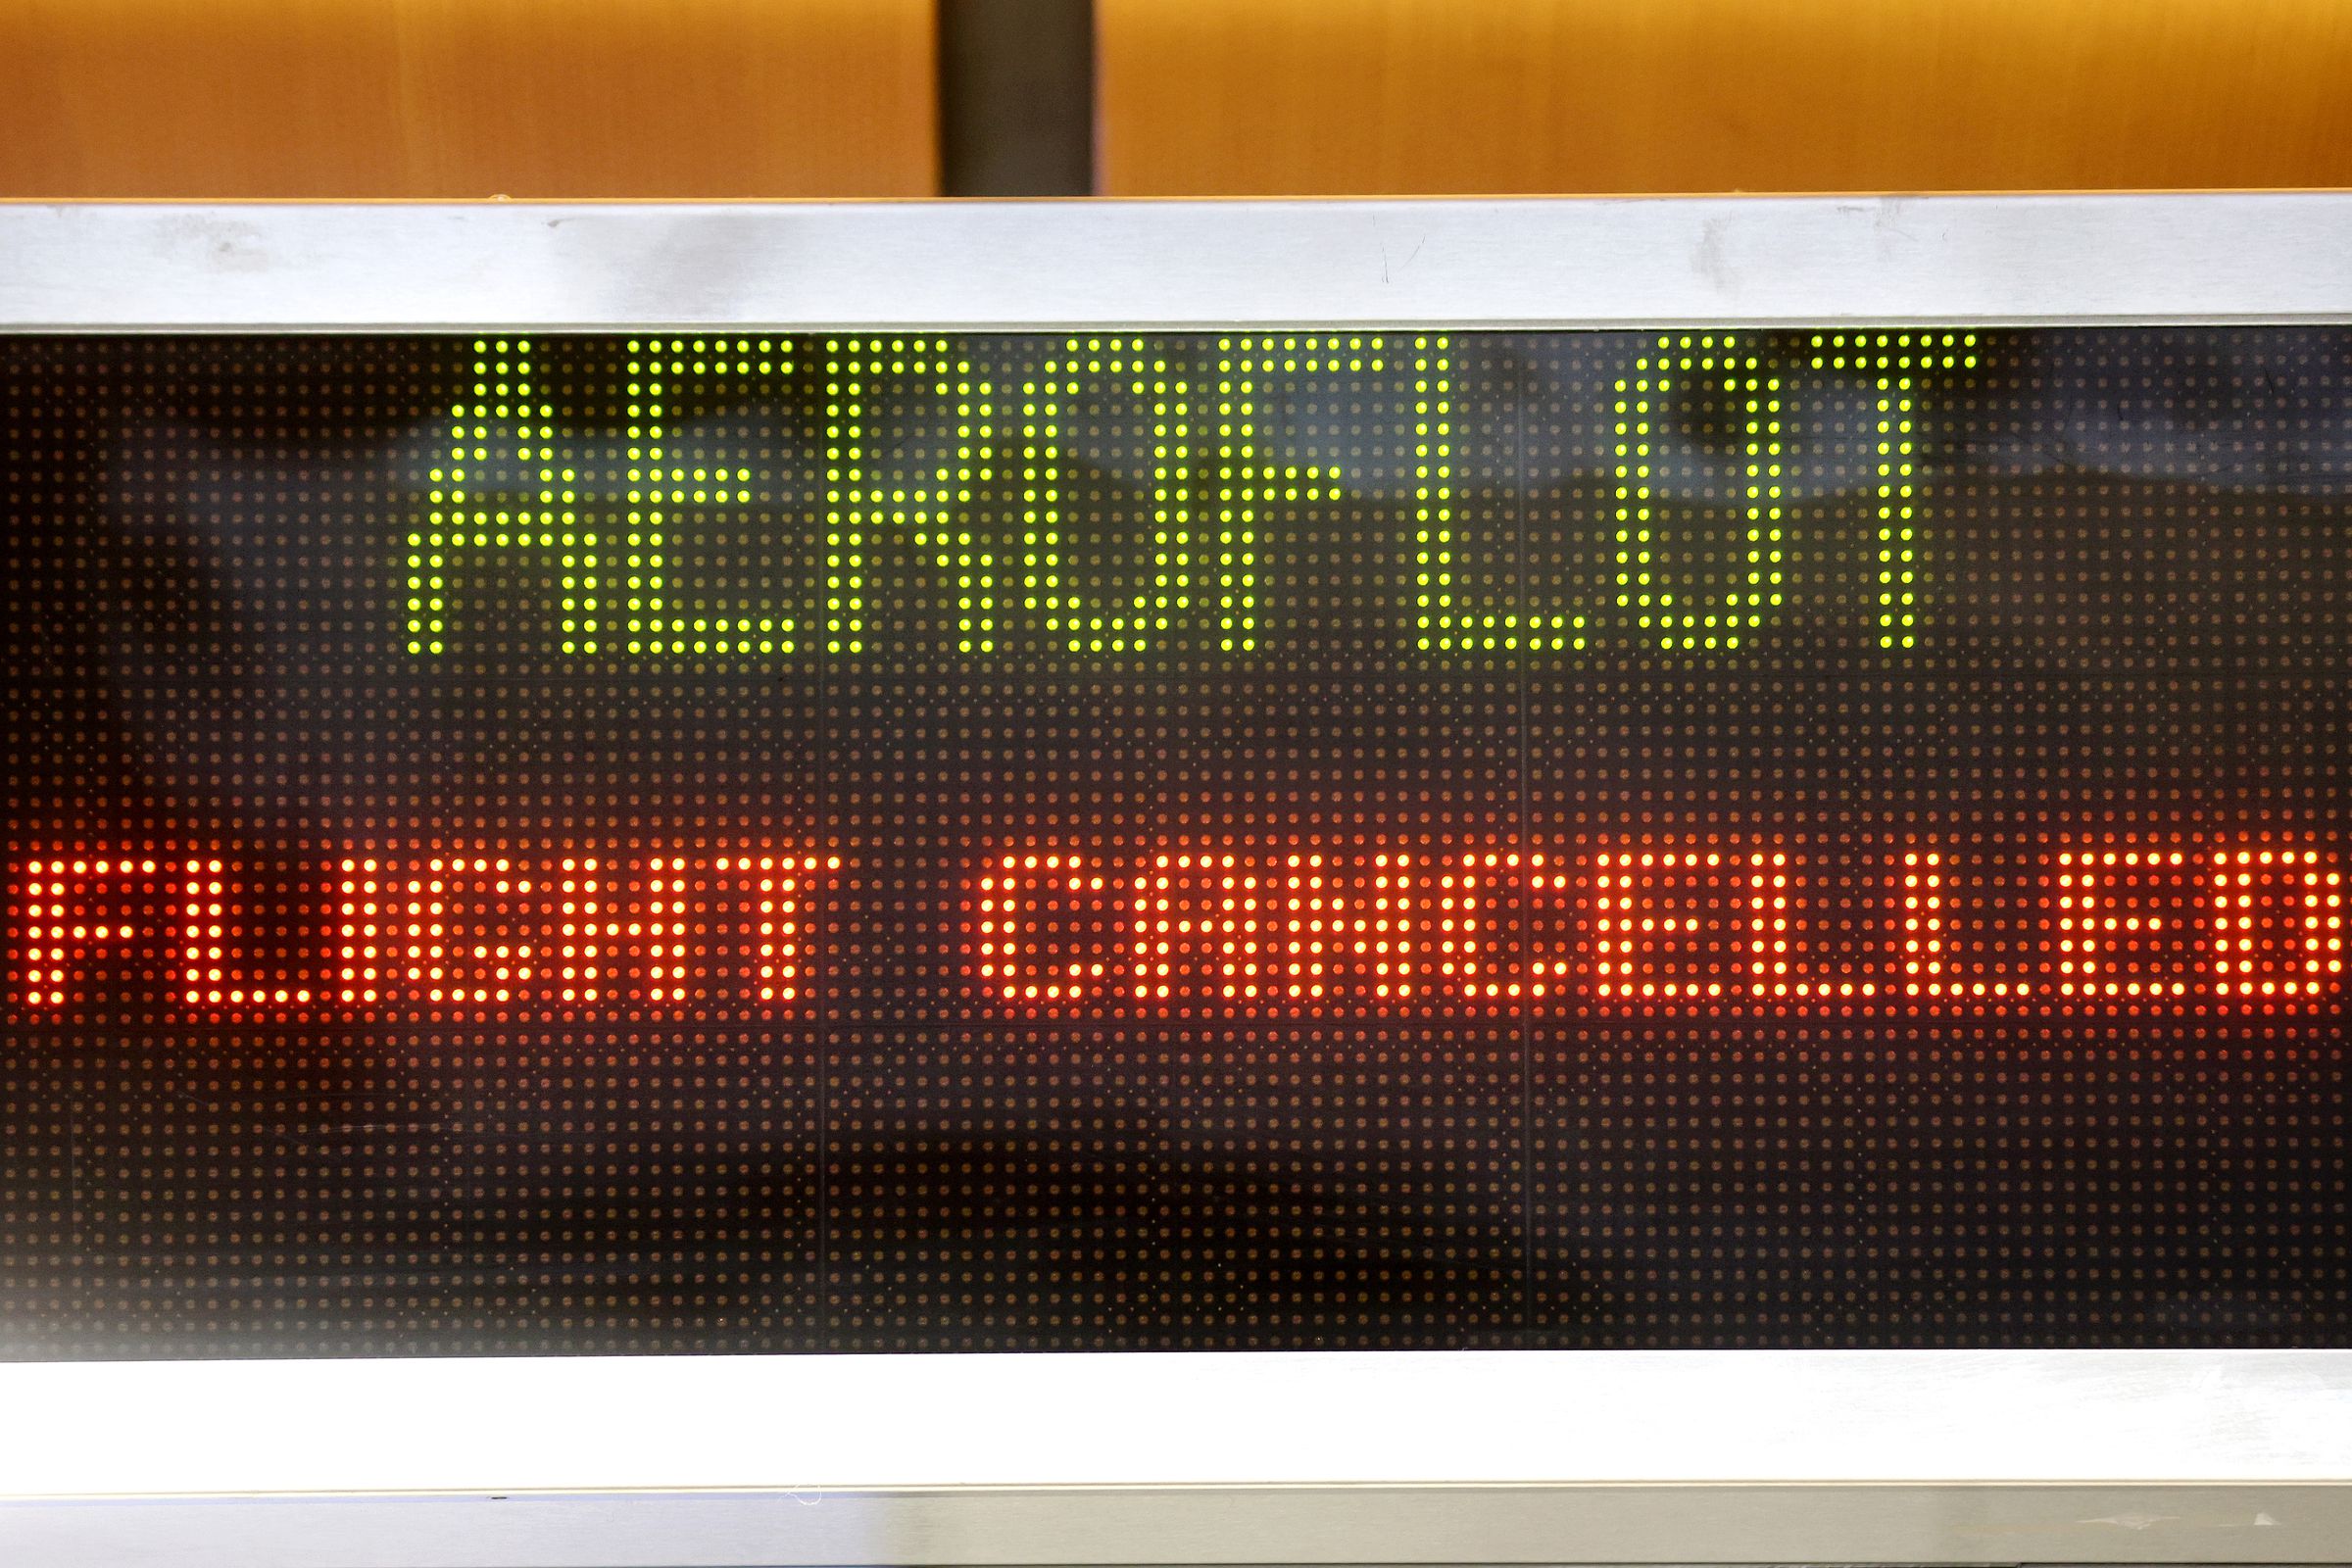 Russia’s Aeroflot is losing its ticket-booking software provider.